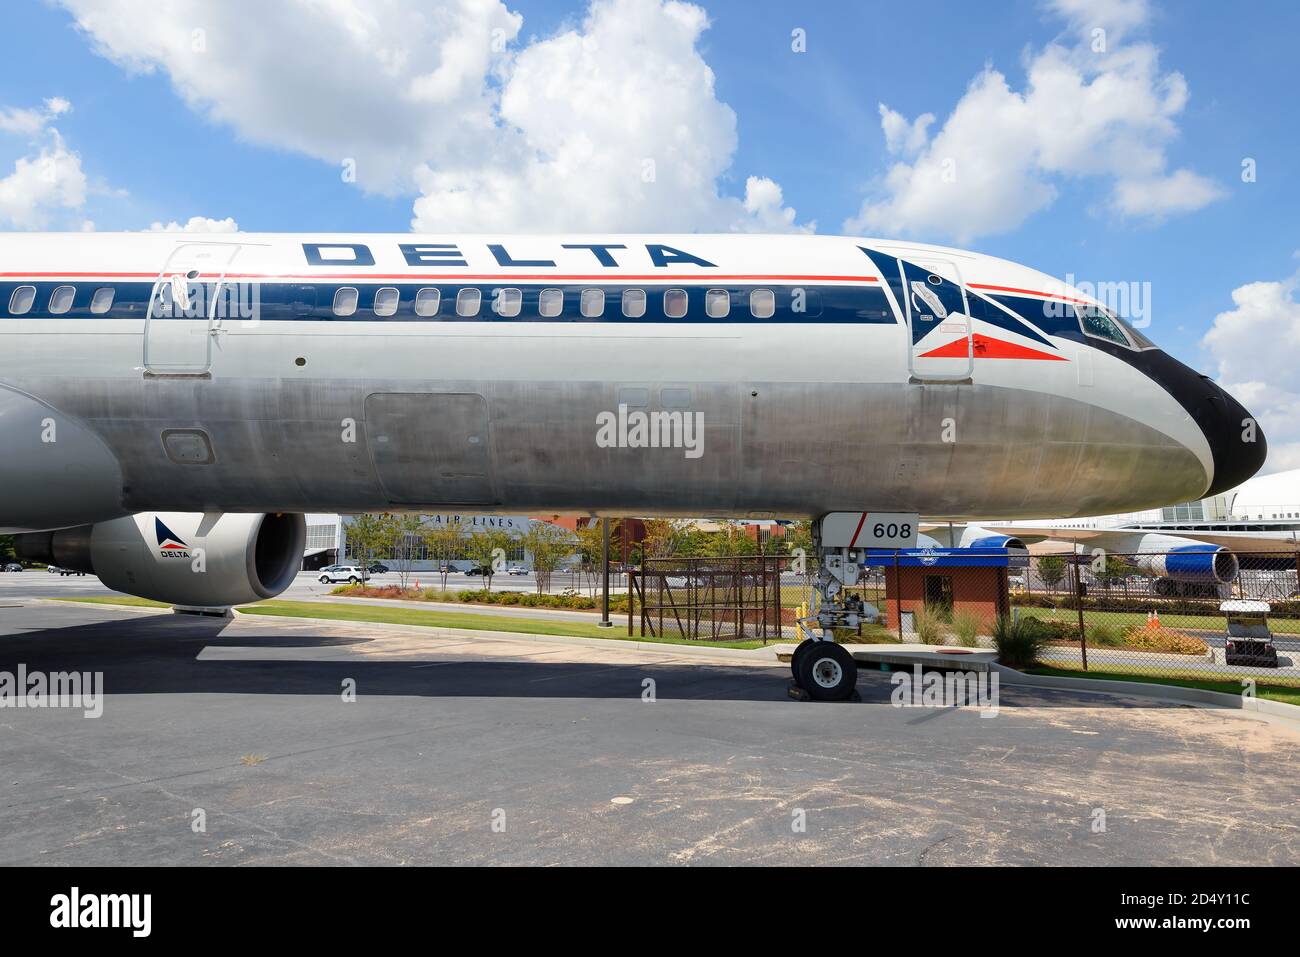 Delta Airlines Boeing 757 with old livery preserved at the Delta Flight Museum near Atlanta Airport, USA. Aircraft on exhibition at aviation museum. Stock Photo